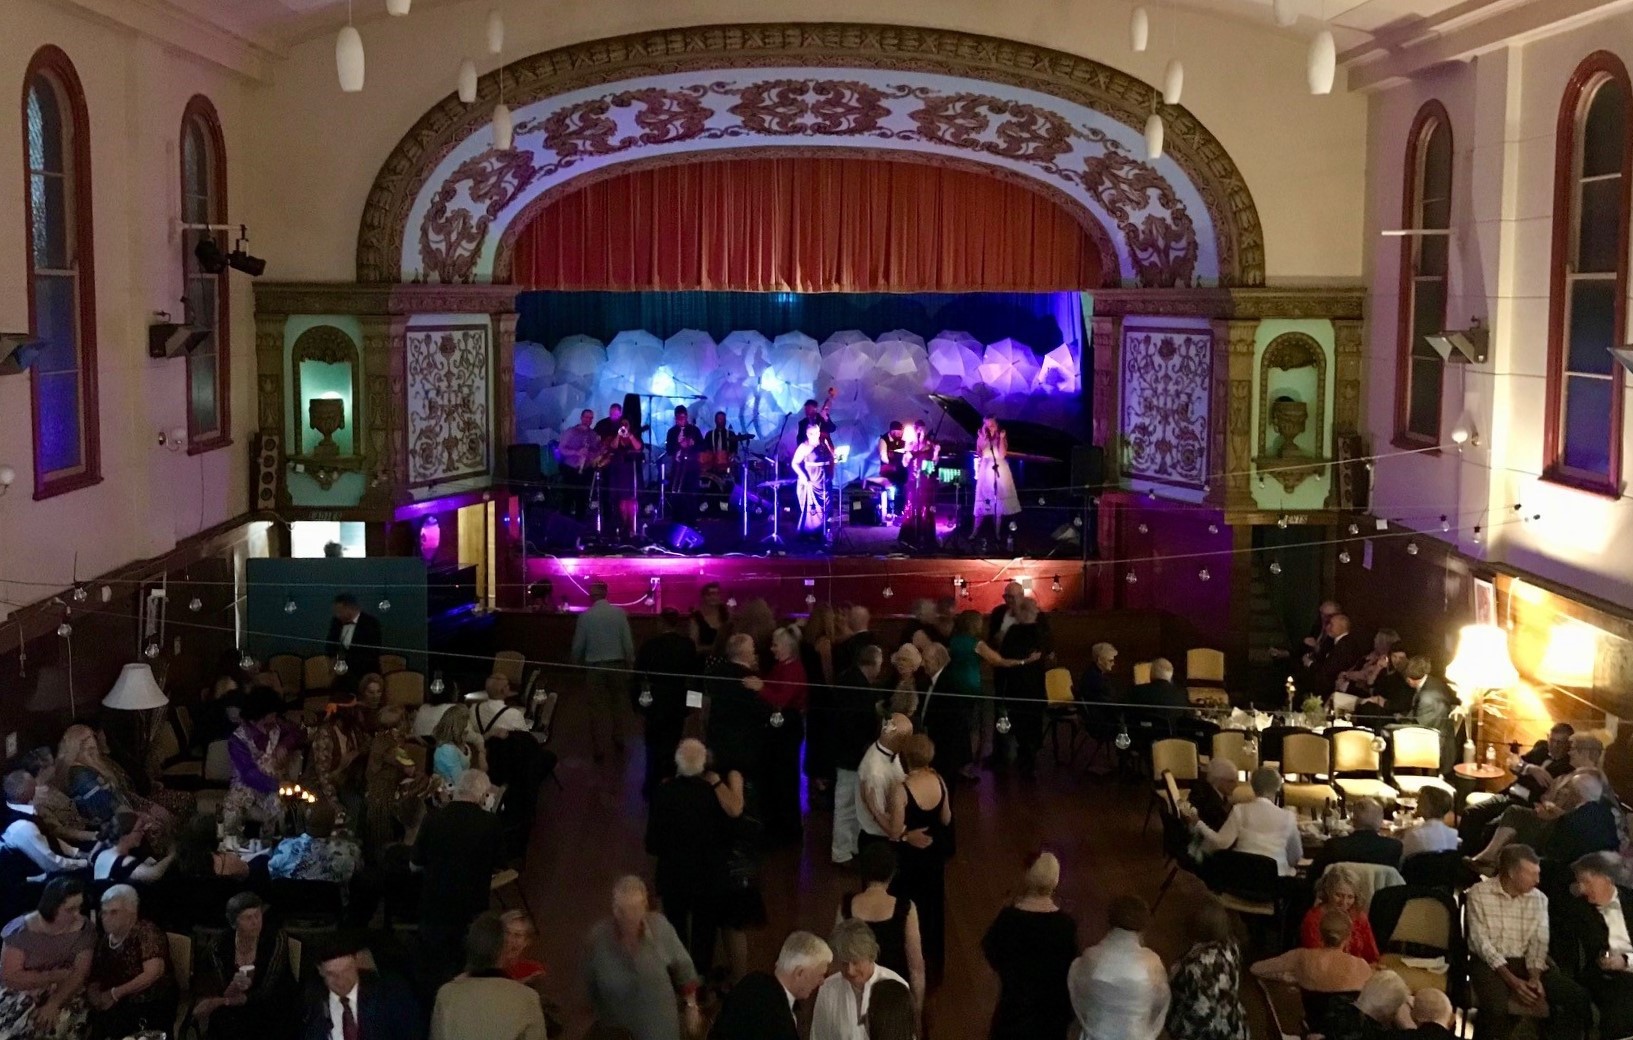 Image of the Trocadero Ball held in the Town Hall